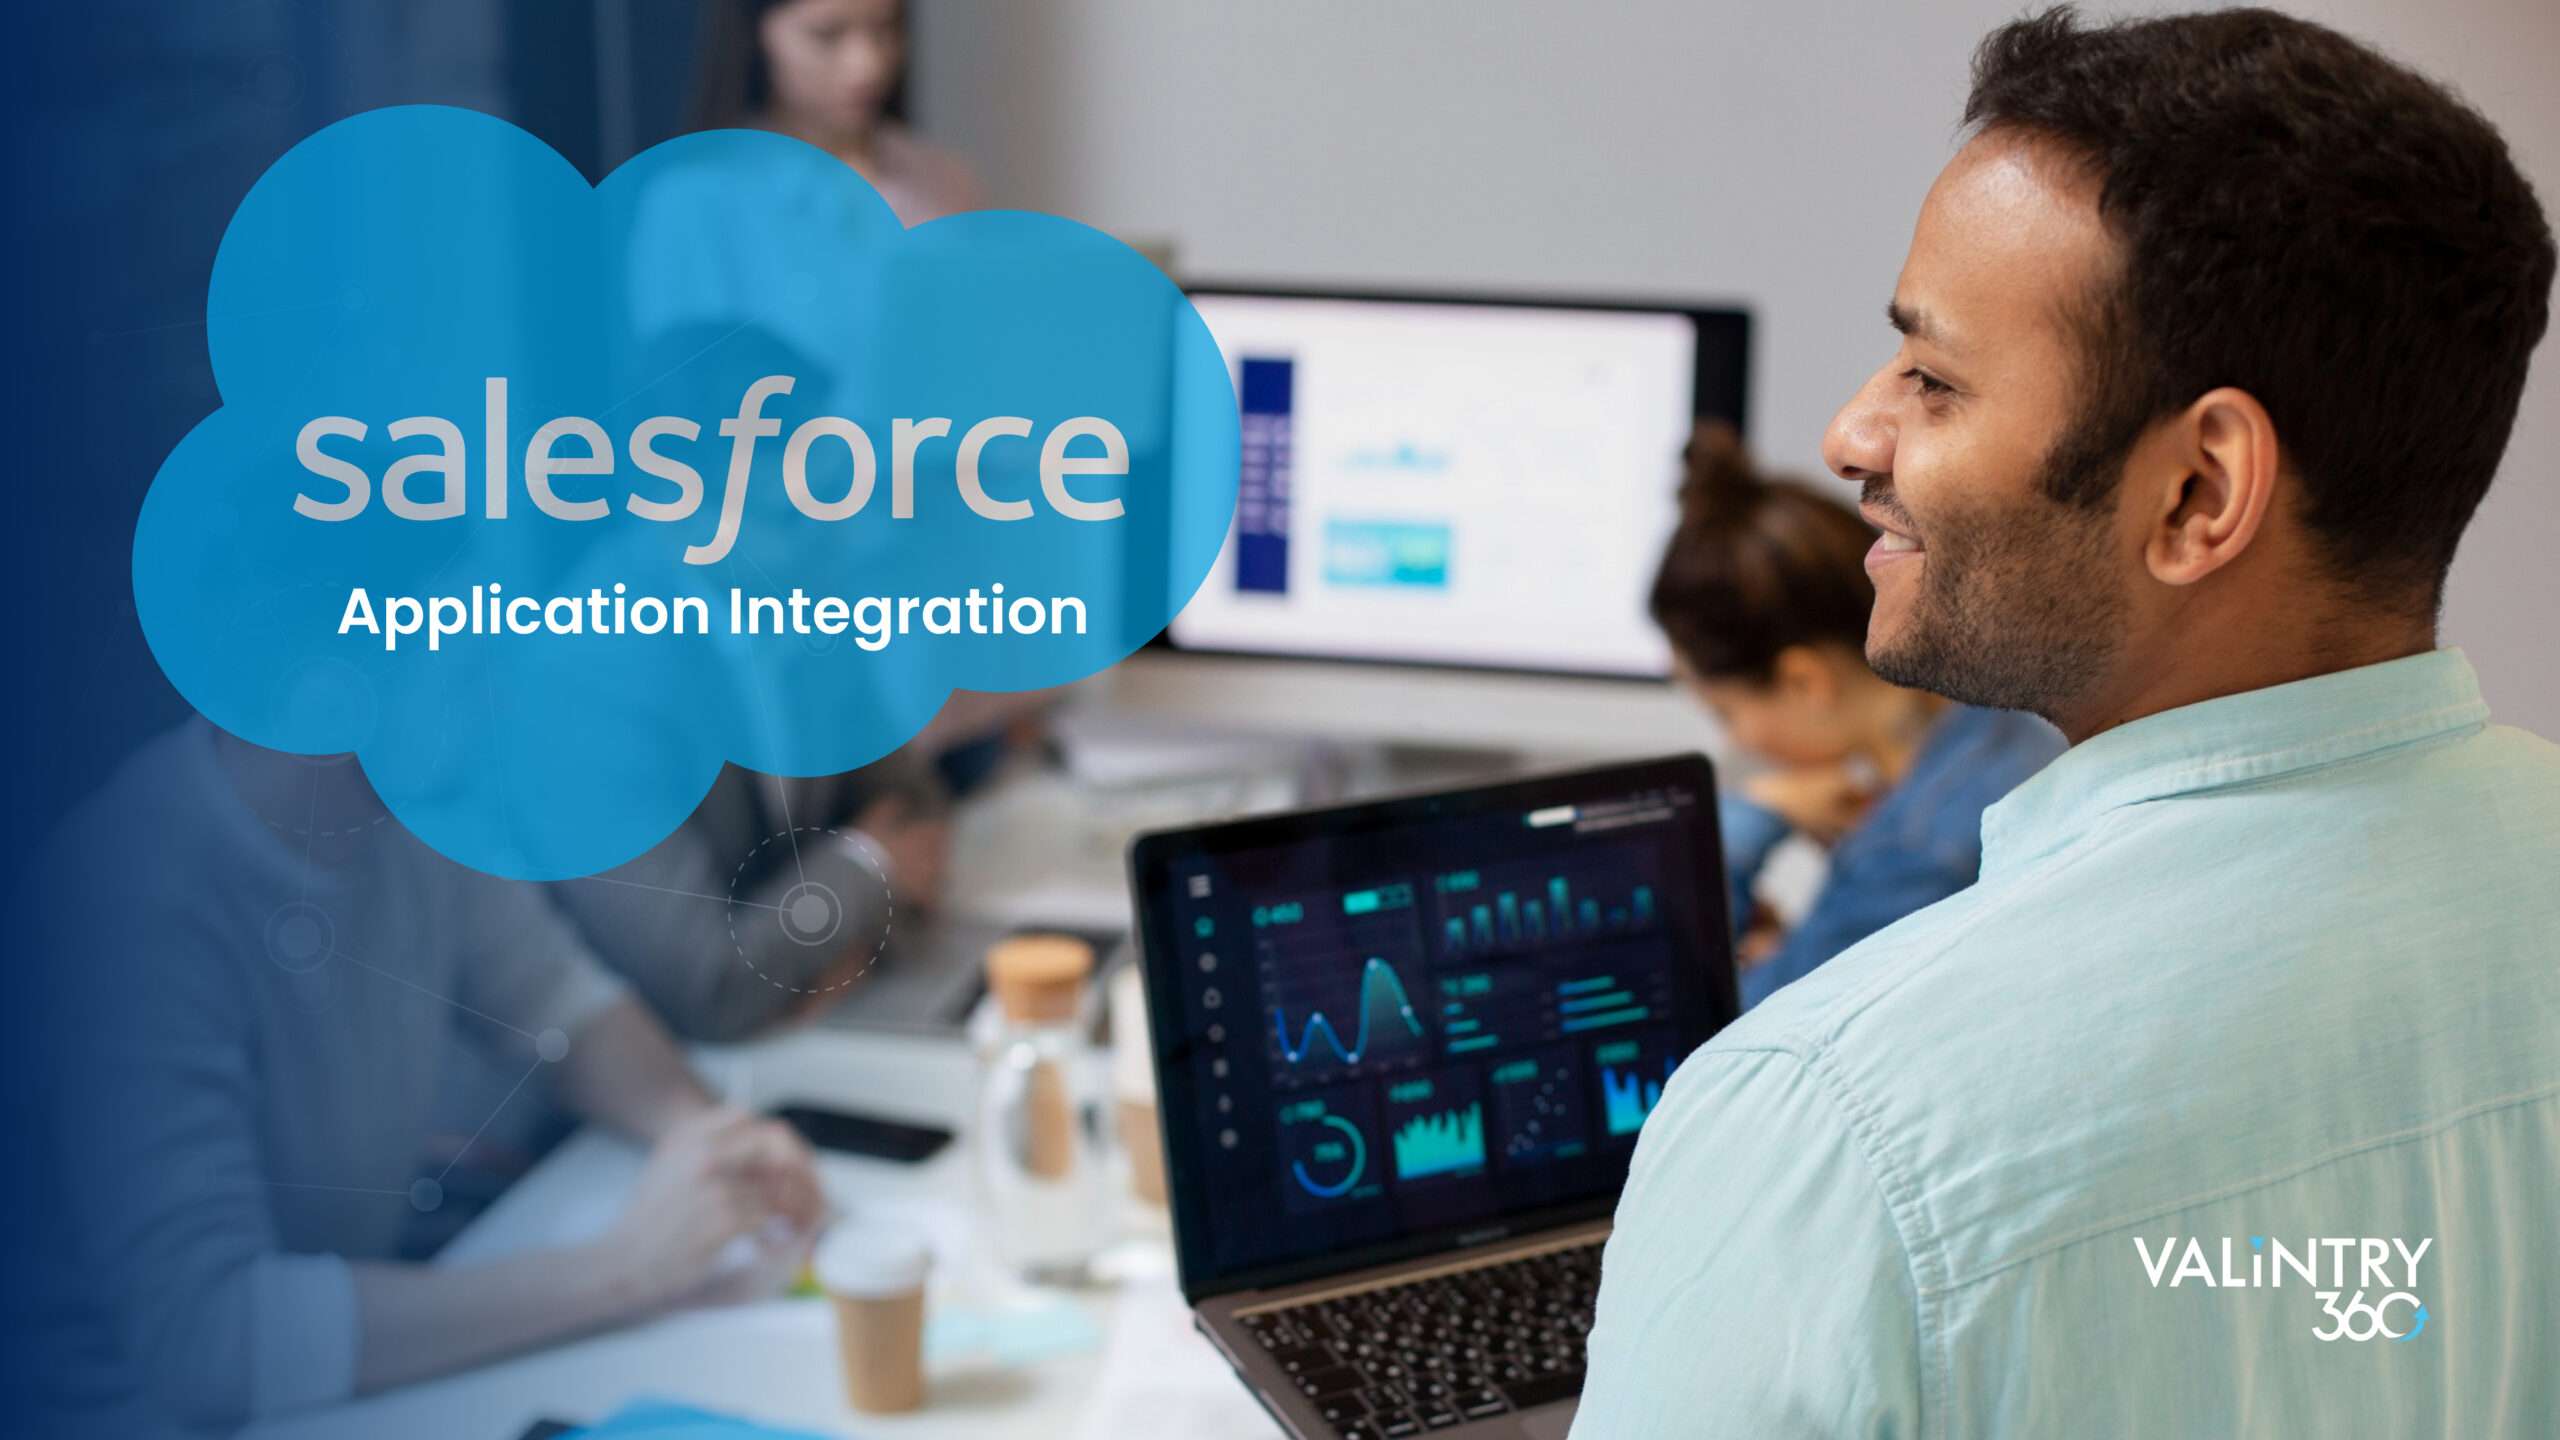 The Business Need for Salesforce Application Integration